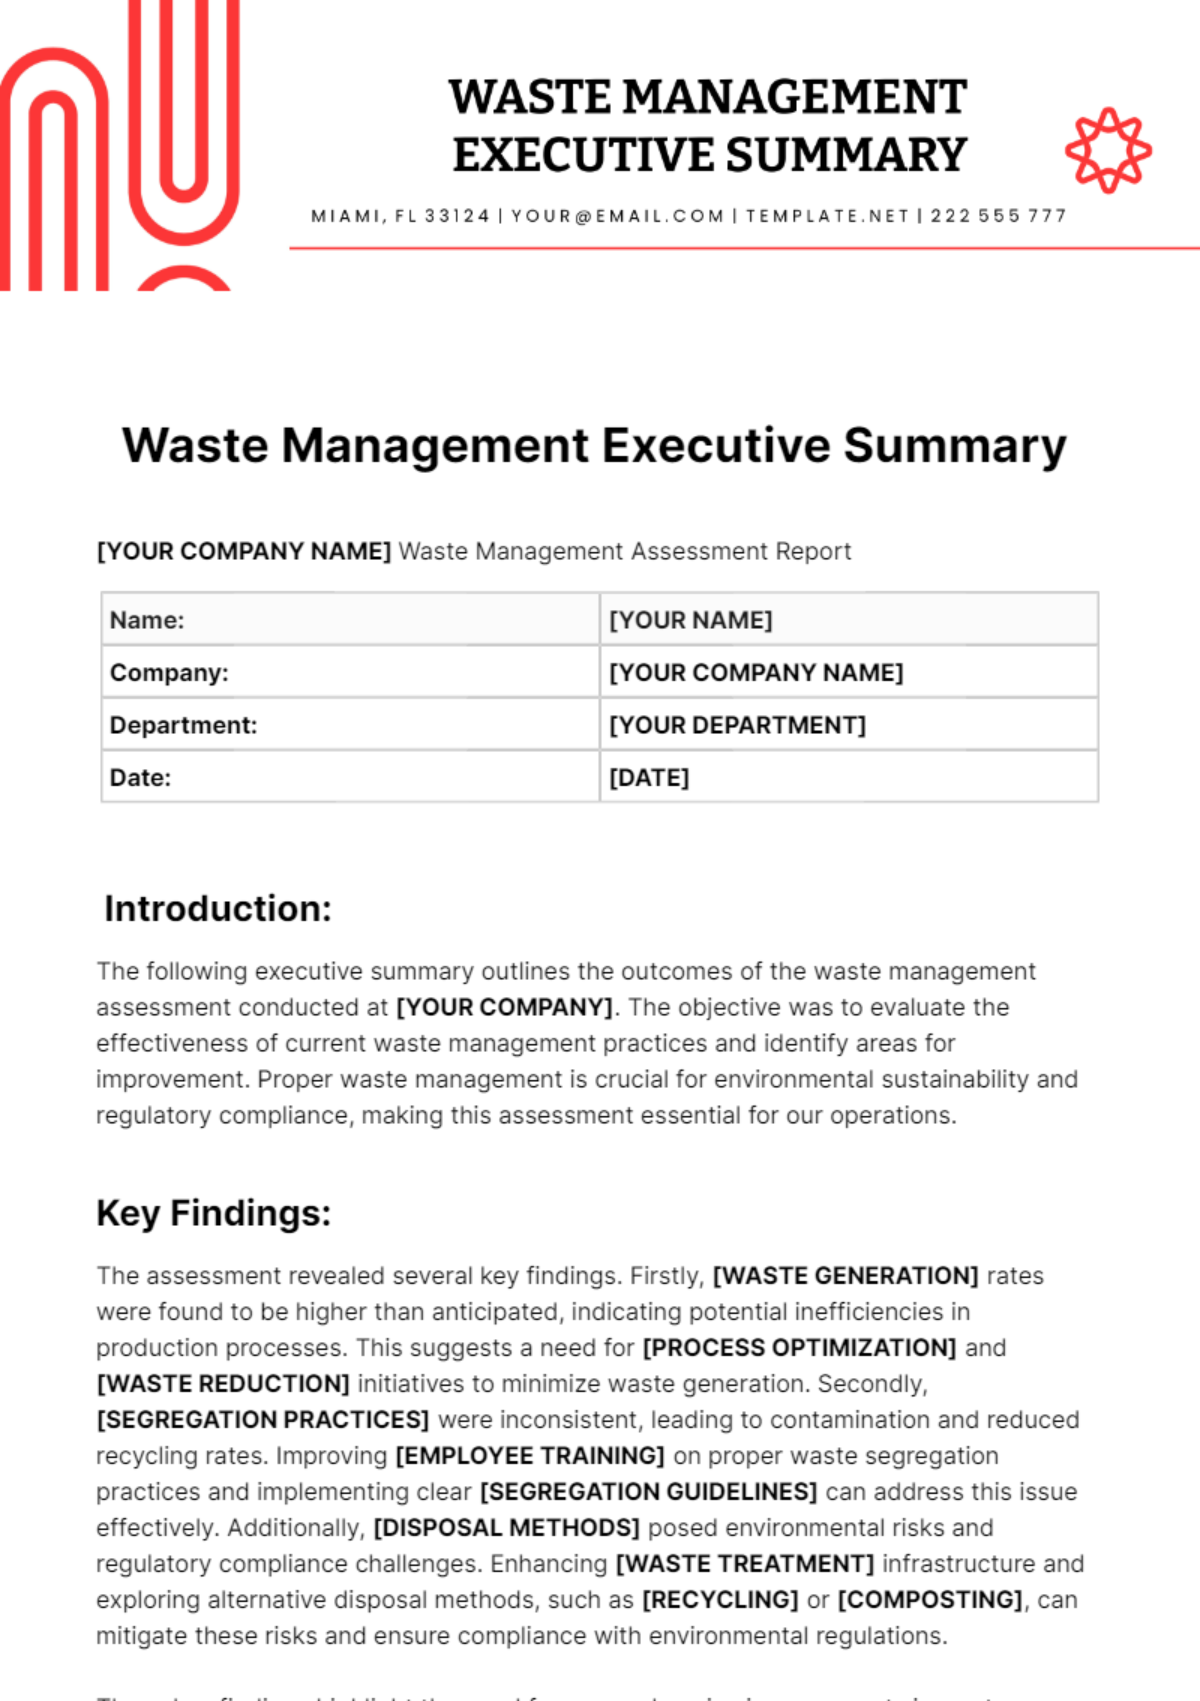 Waste Management Executive Summary Template